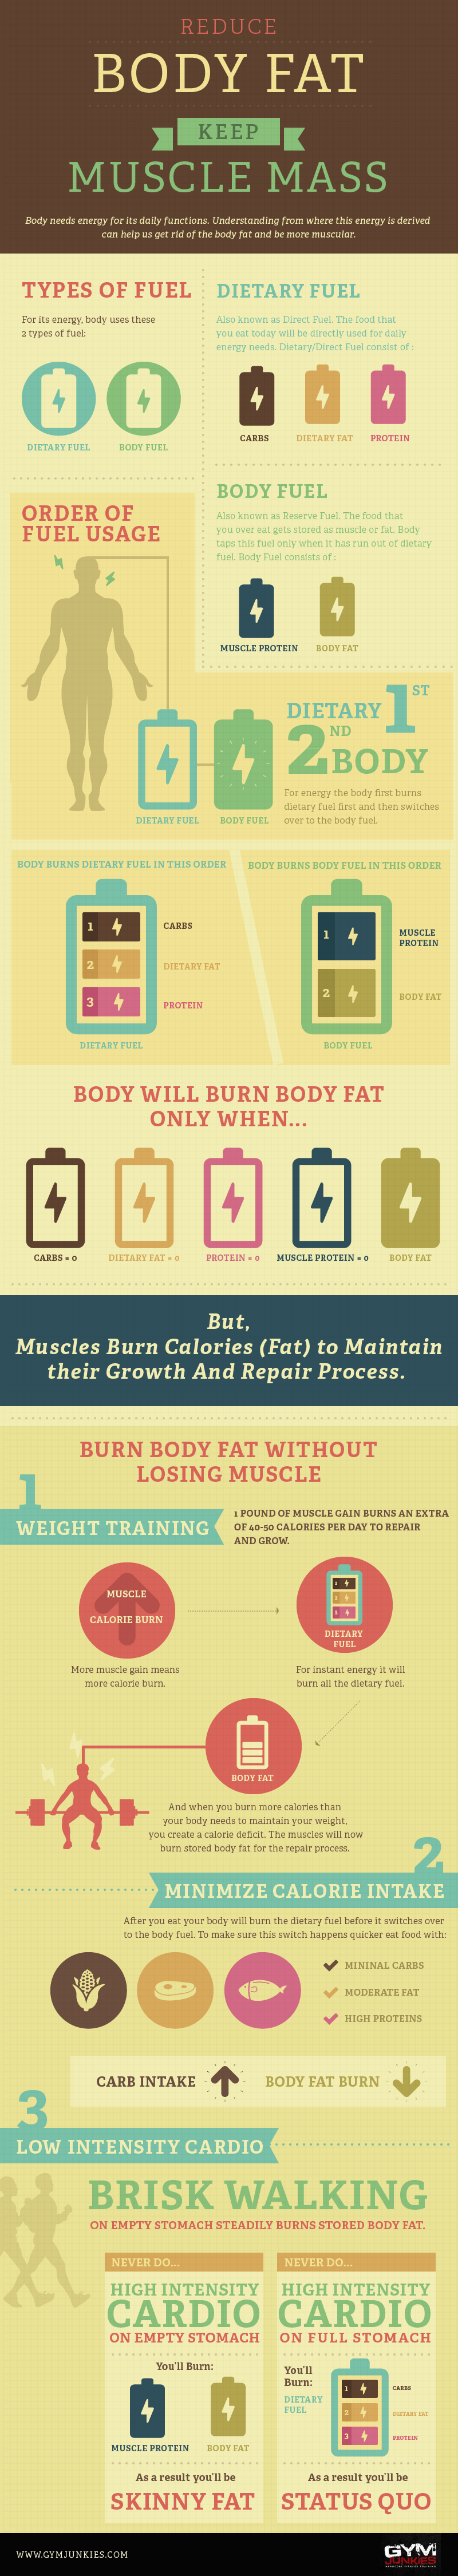 Reduce Body Fat Keep Your Muscle Mass [Infographic]